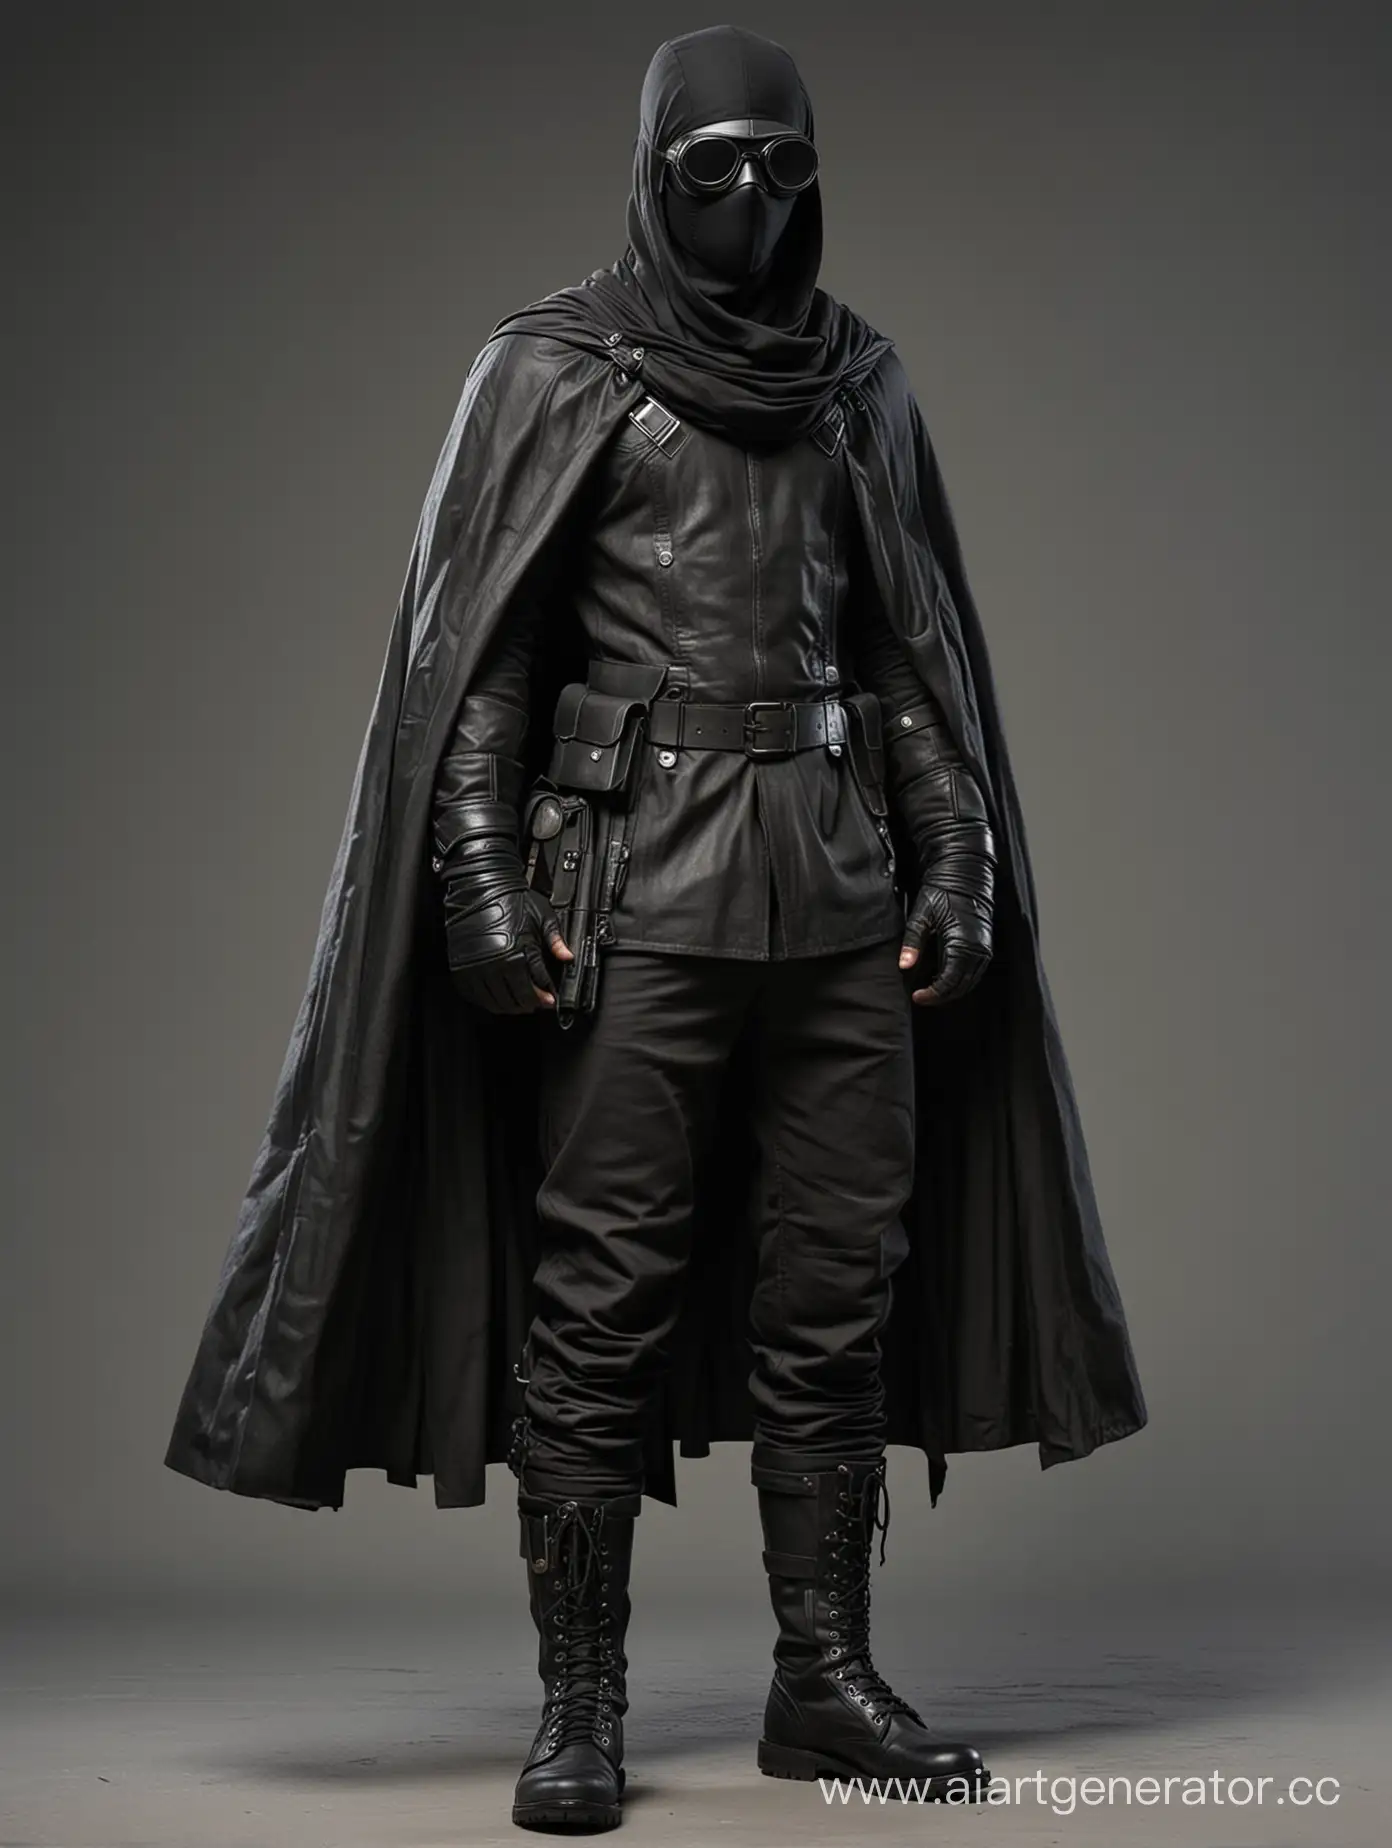 Mysterious-Soldier-with-Black-Leather-Cloak-and-Mask